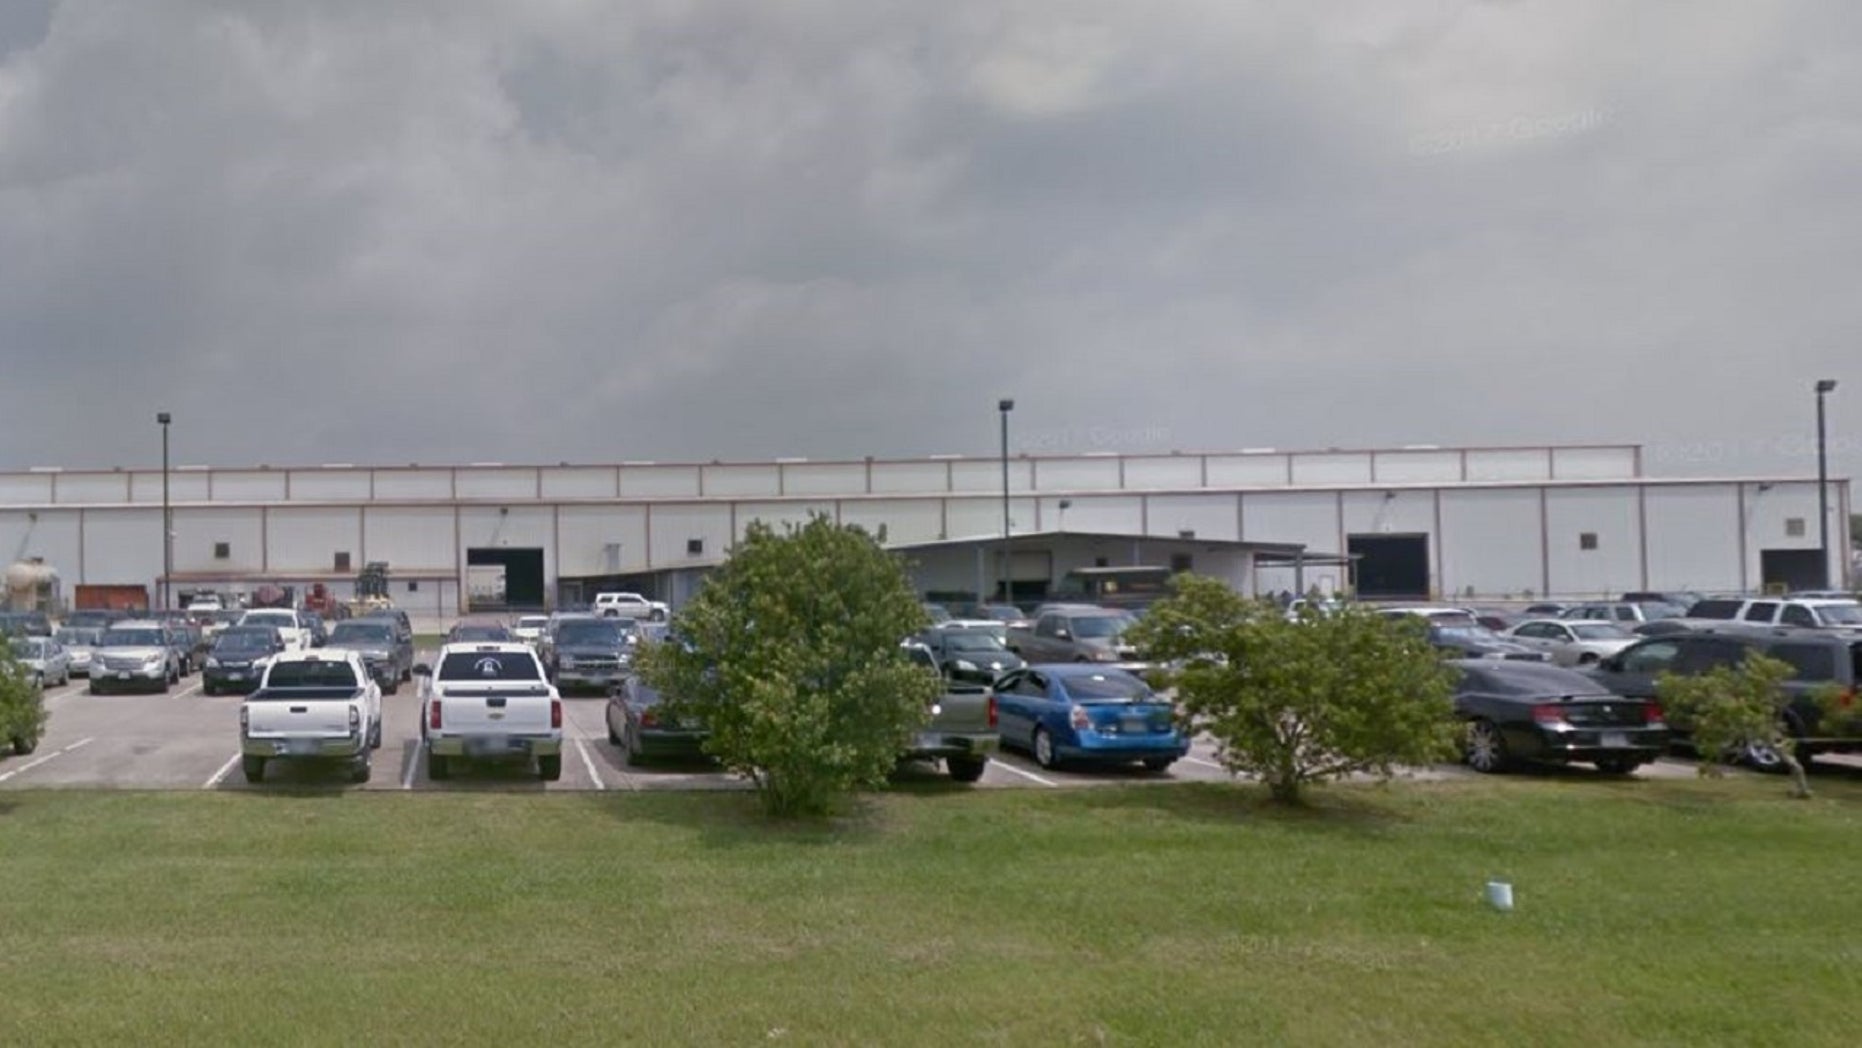 Two people stabbed, one of them fatally, at workplace near Houston